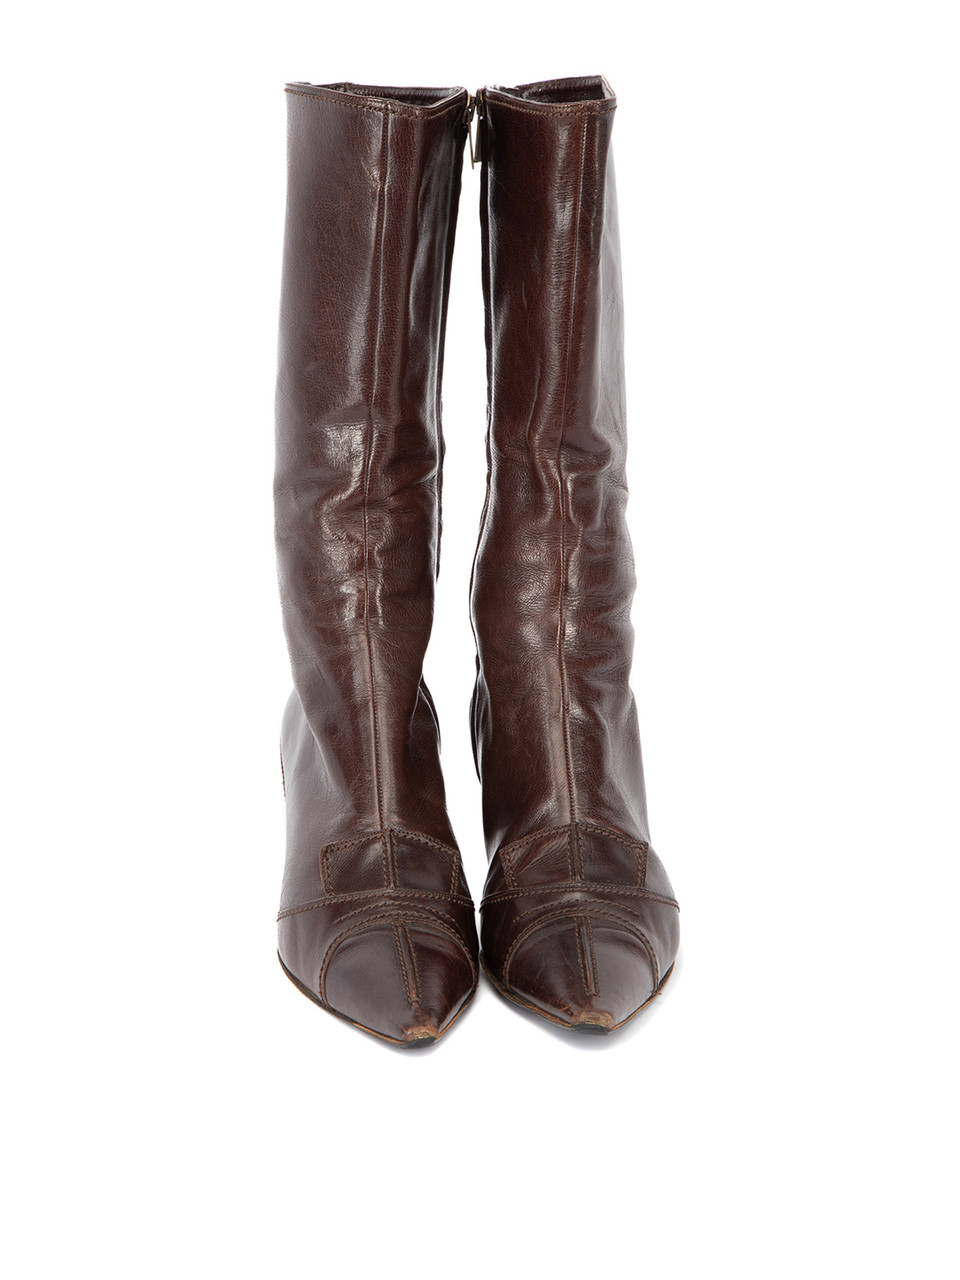 Yves Saint Laurent Brown Pointed Toe Leather Calf Boots